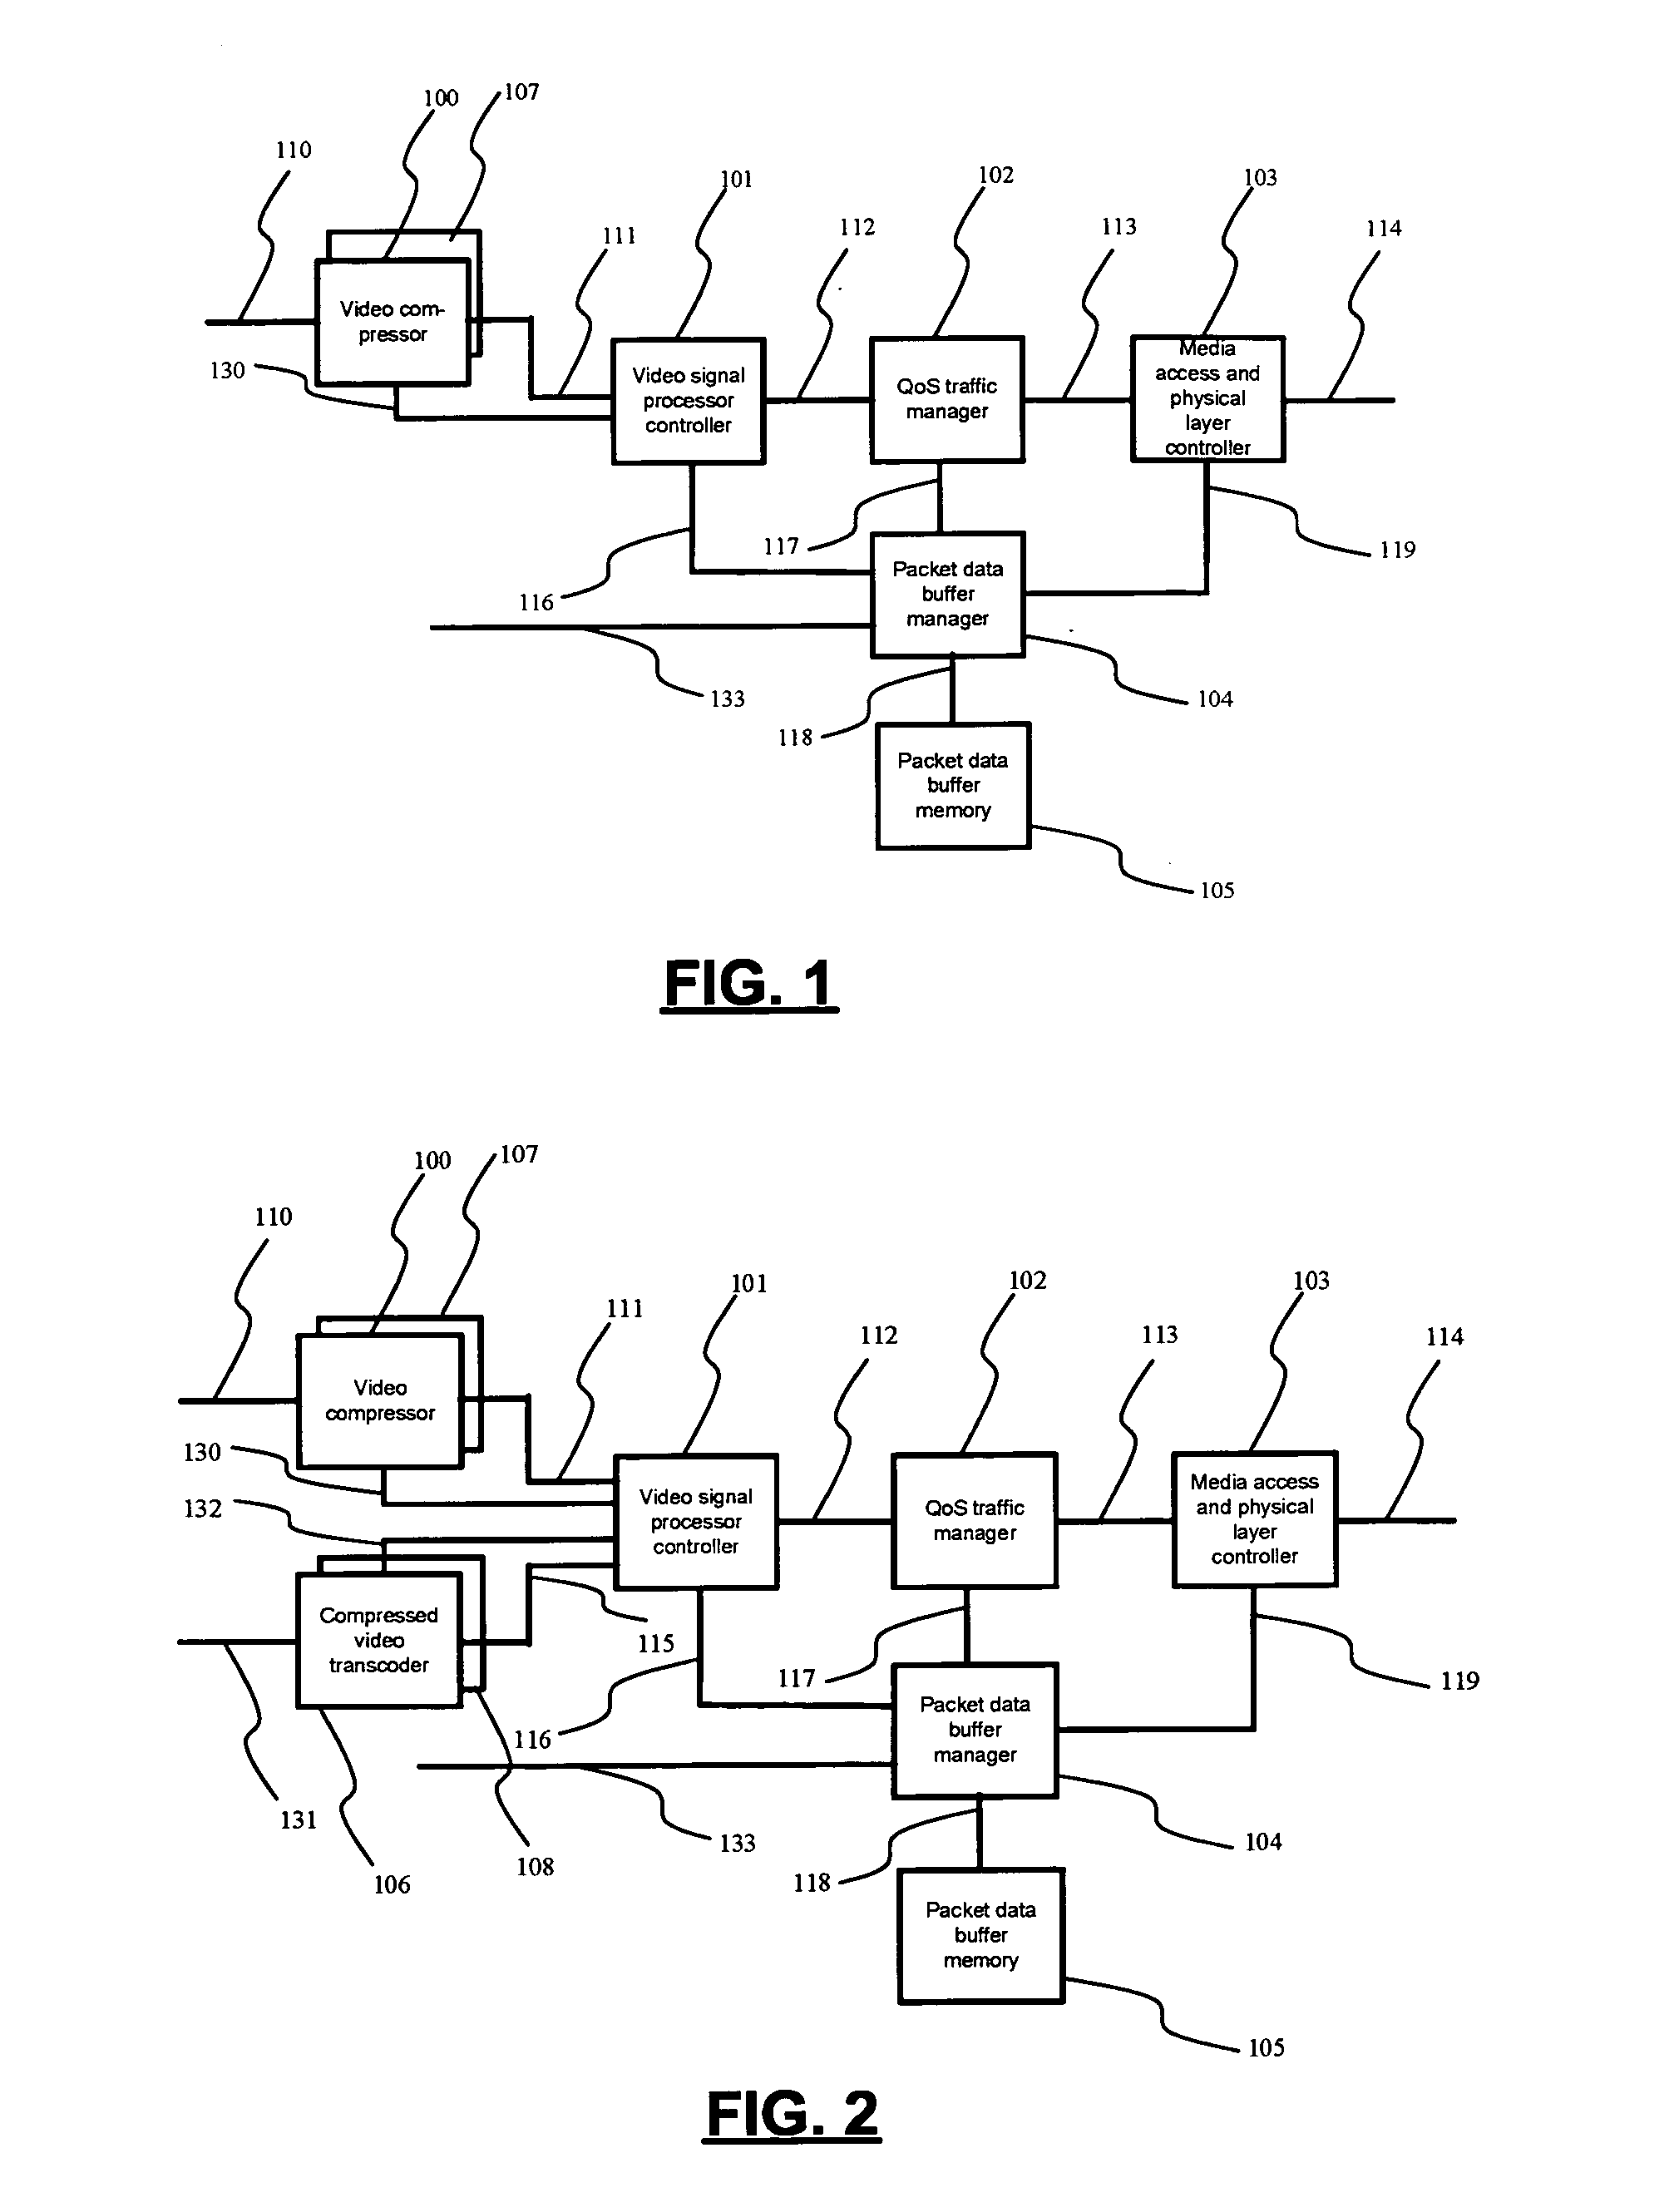 Network-aware adaptive video compression for variable bit rate transmission